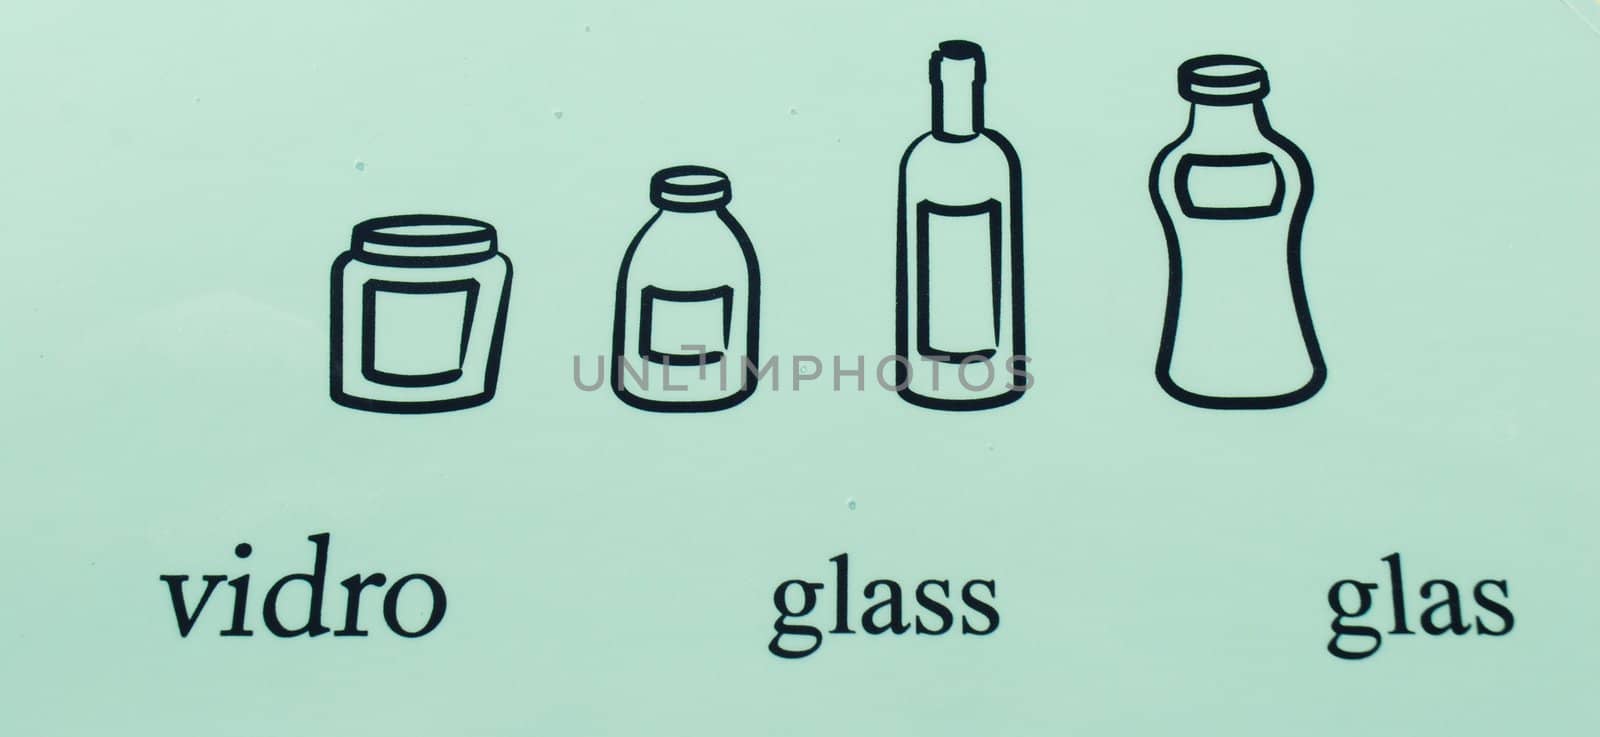 Glass recycle symbols in different languages by luissantos84